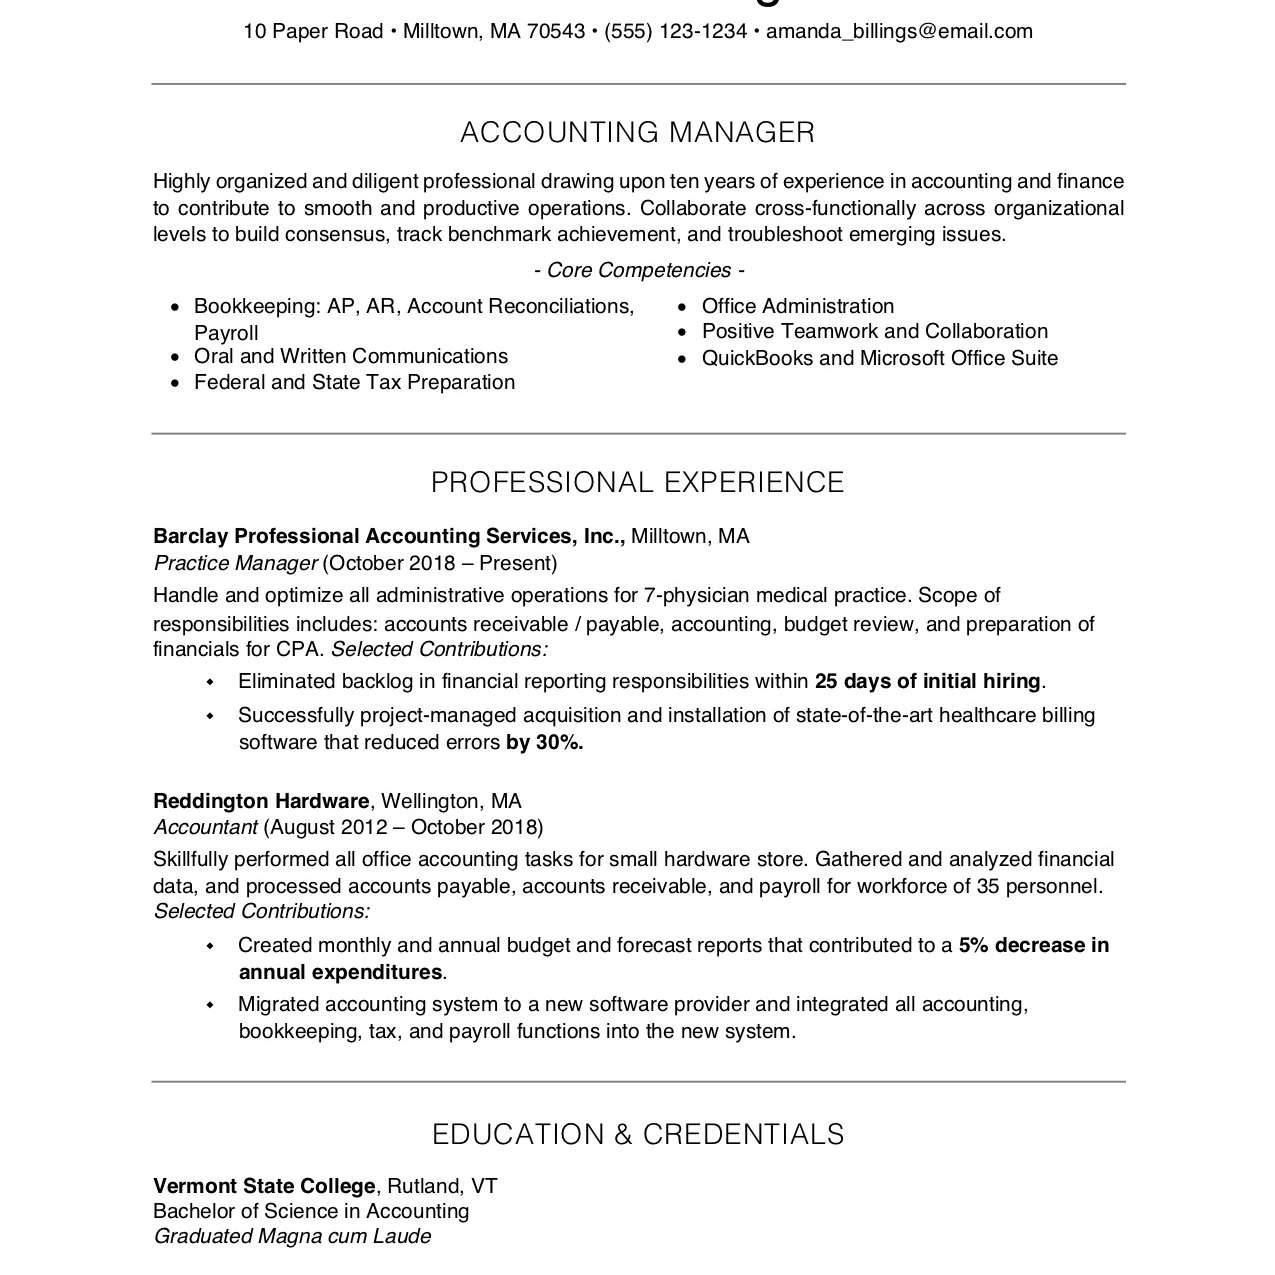 Sample Resume Template for Experienced Candidate Professional Resume Examples and Writing Tips